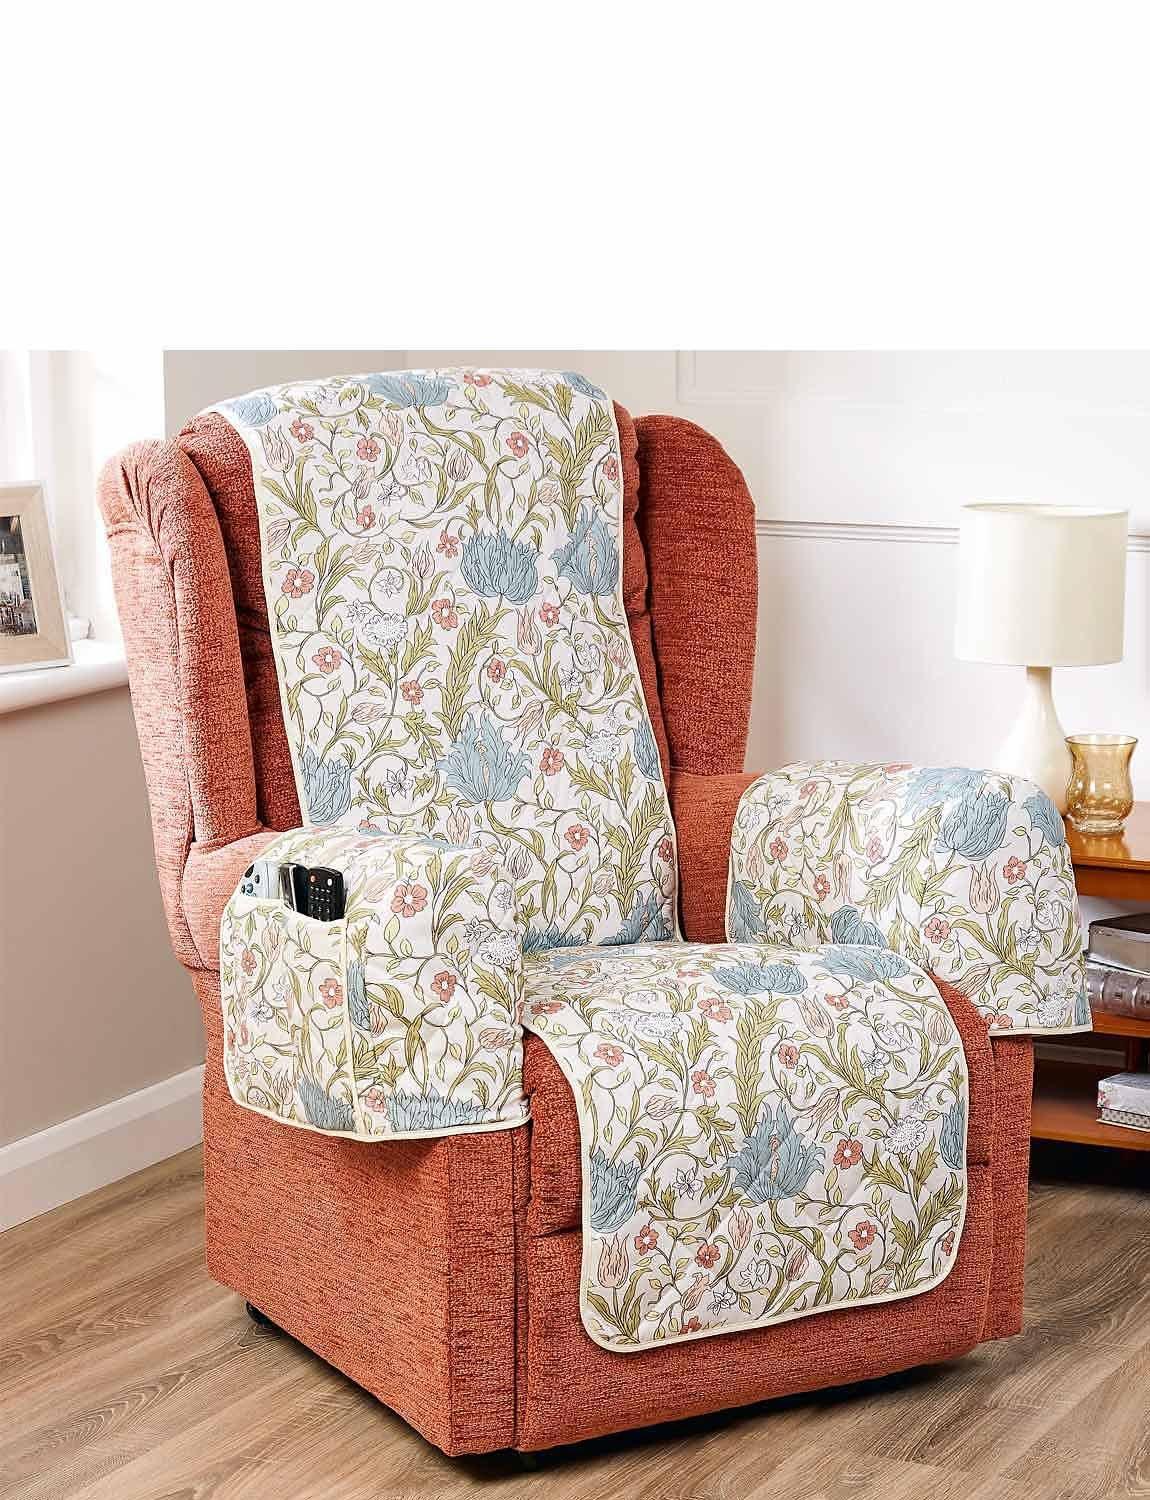 Quilted Furniture Protectors/Armchair Organiser